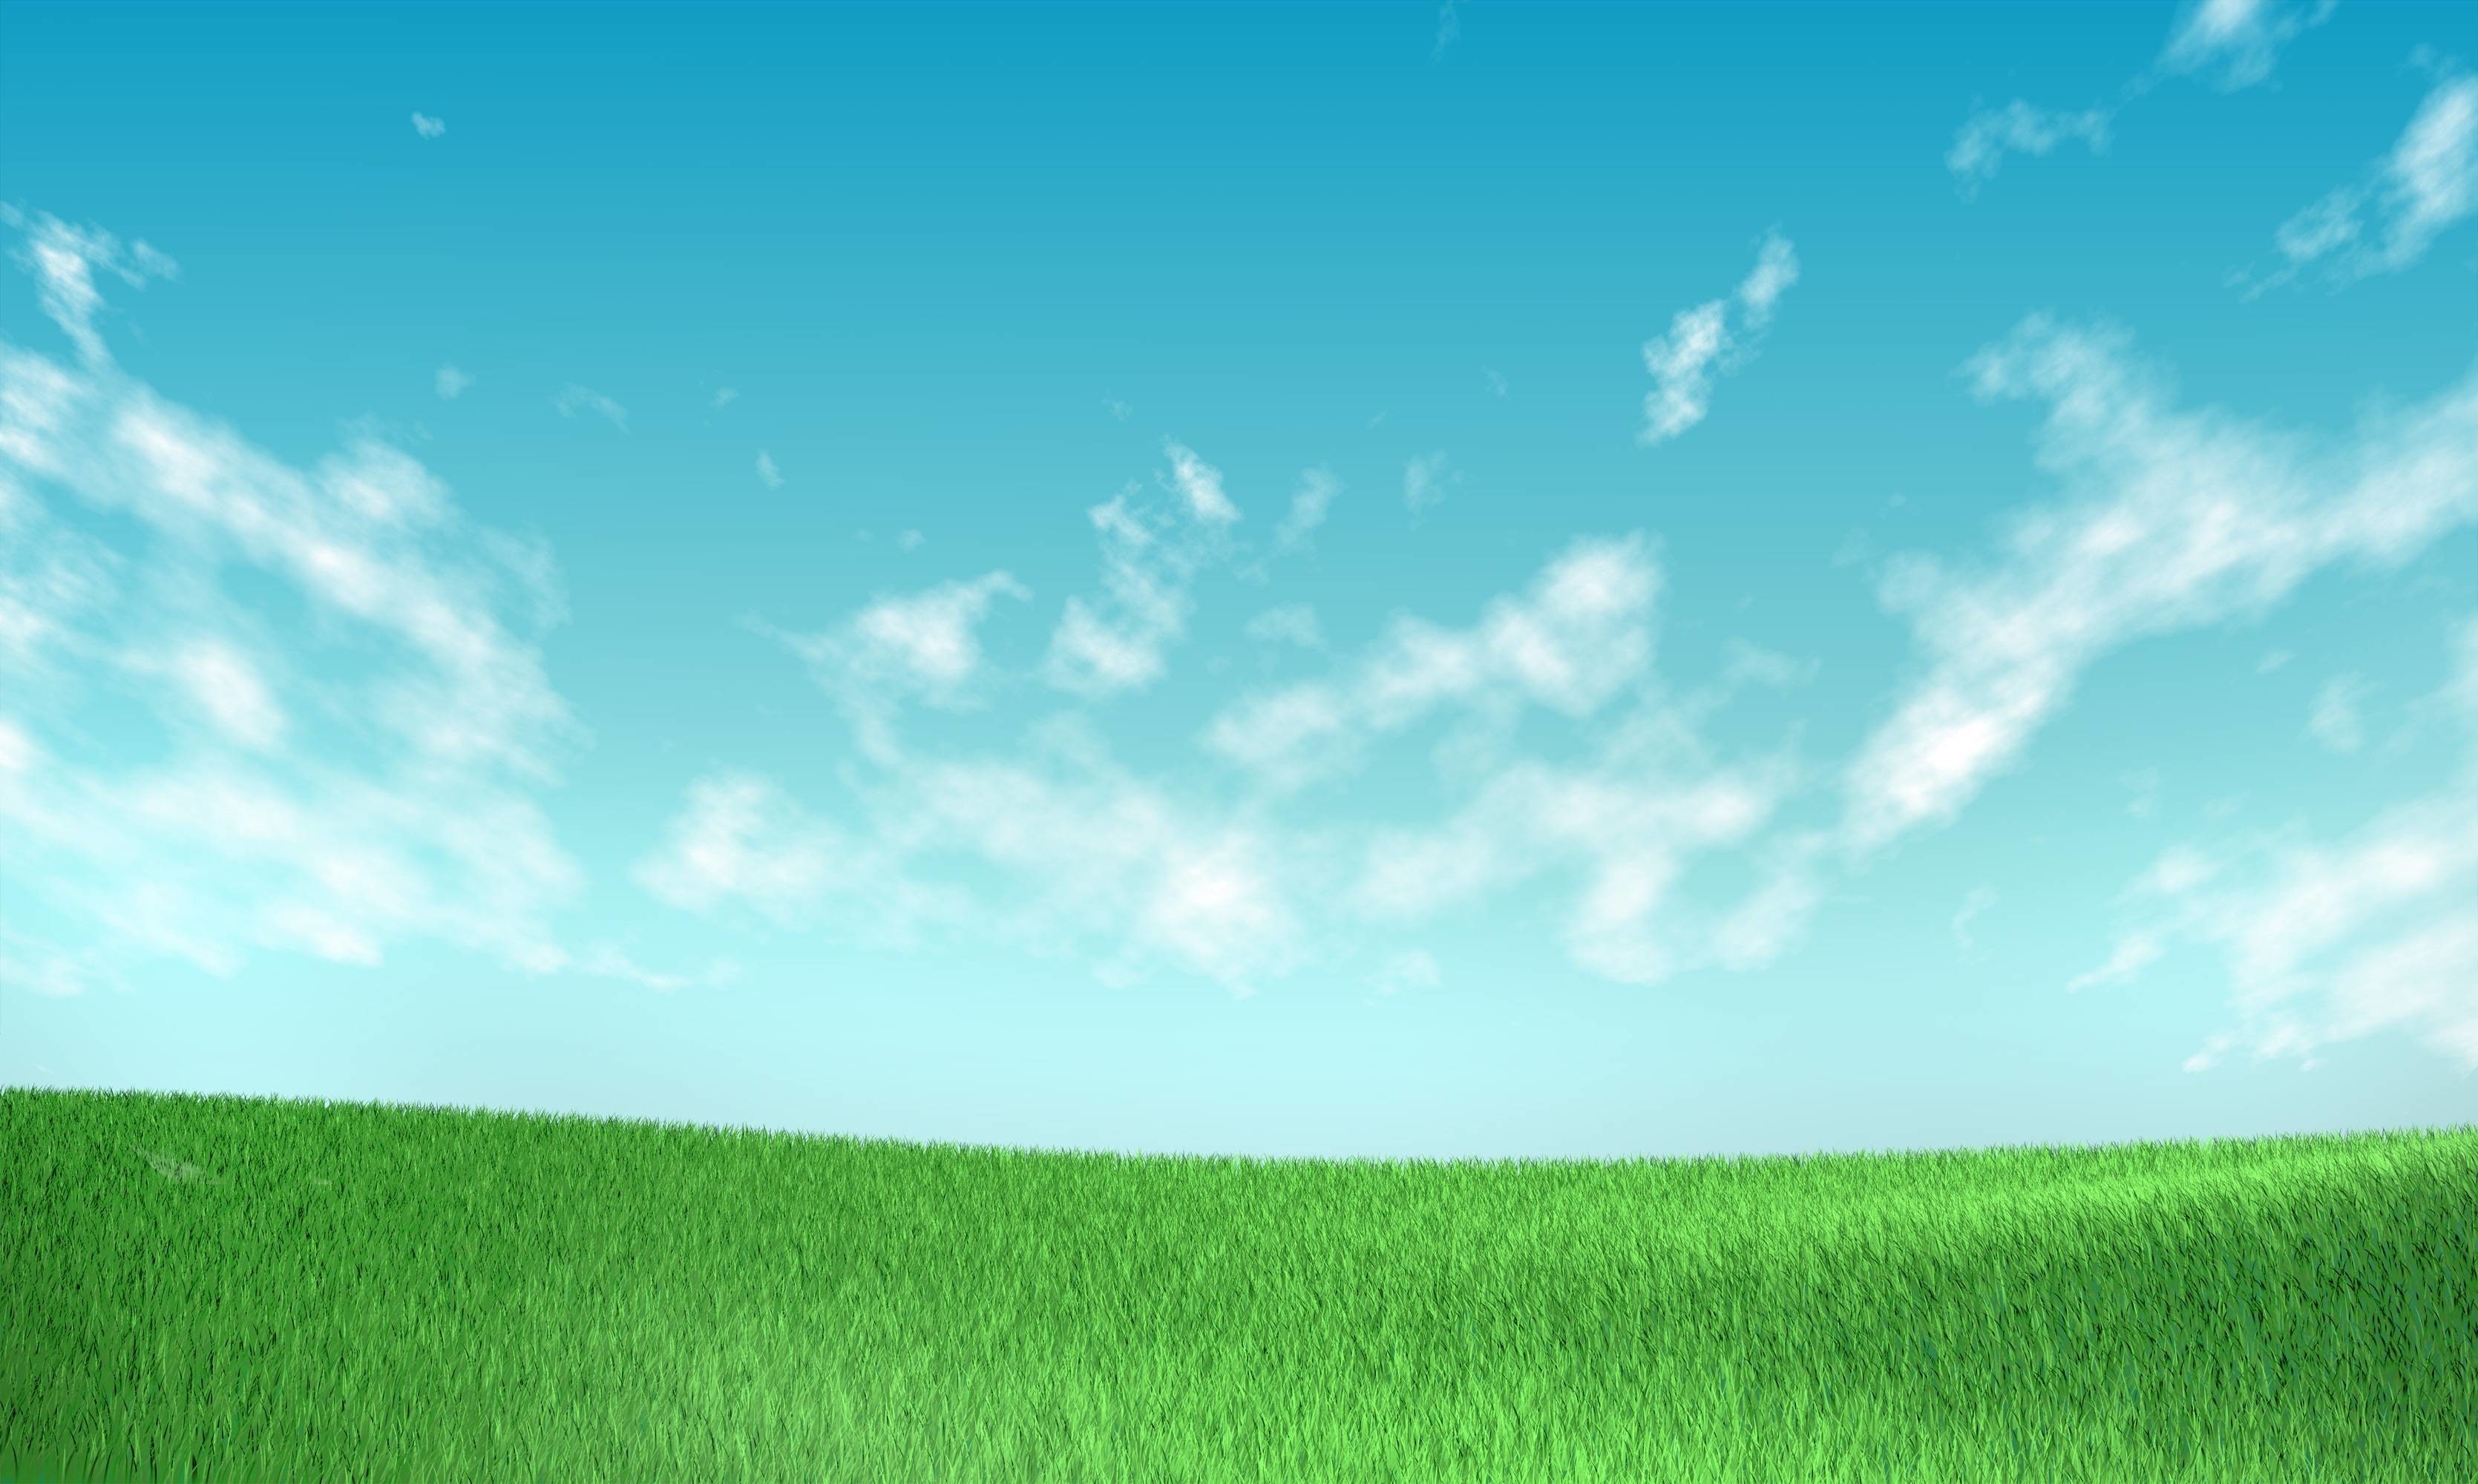 3339x2000 pin Grass clipart sky background #2